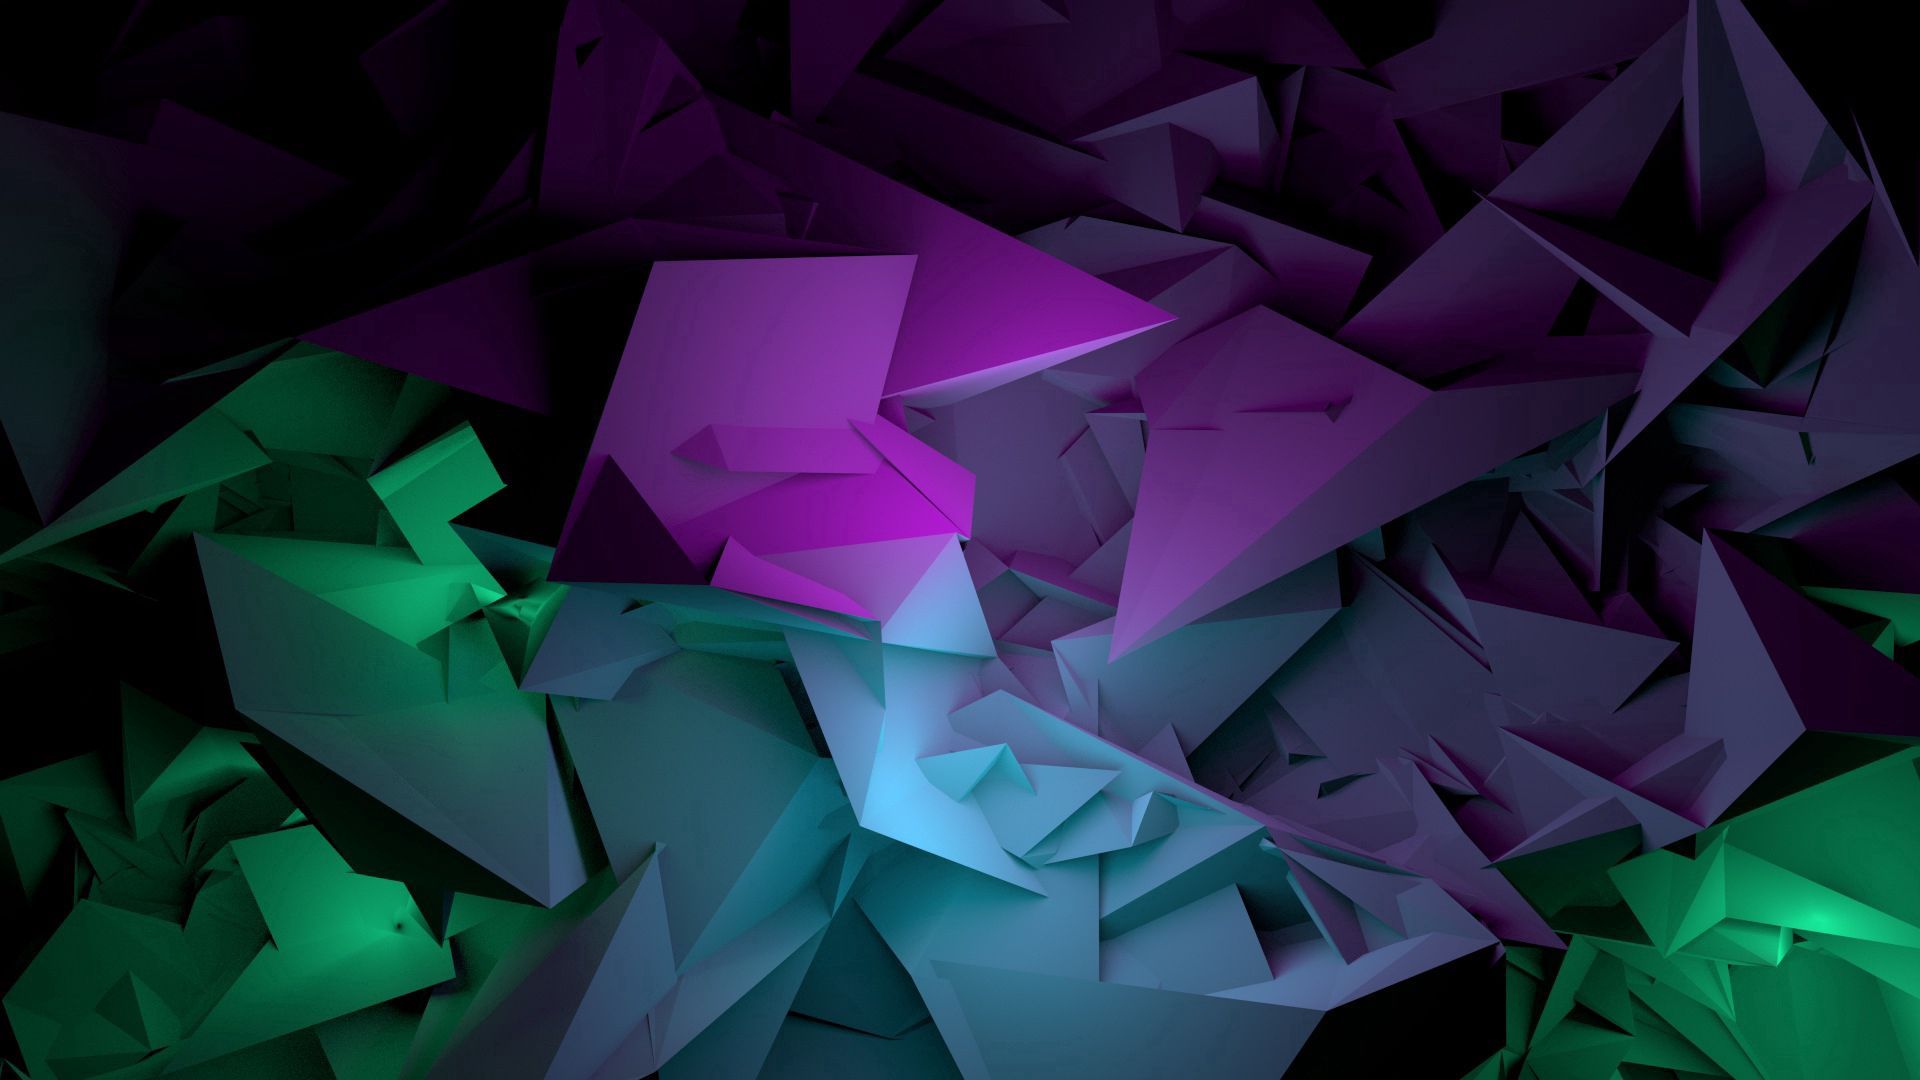 Download wallpaper 1920x1080 abstract, shapes, purple, green HD